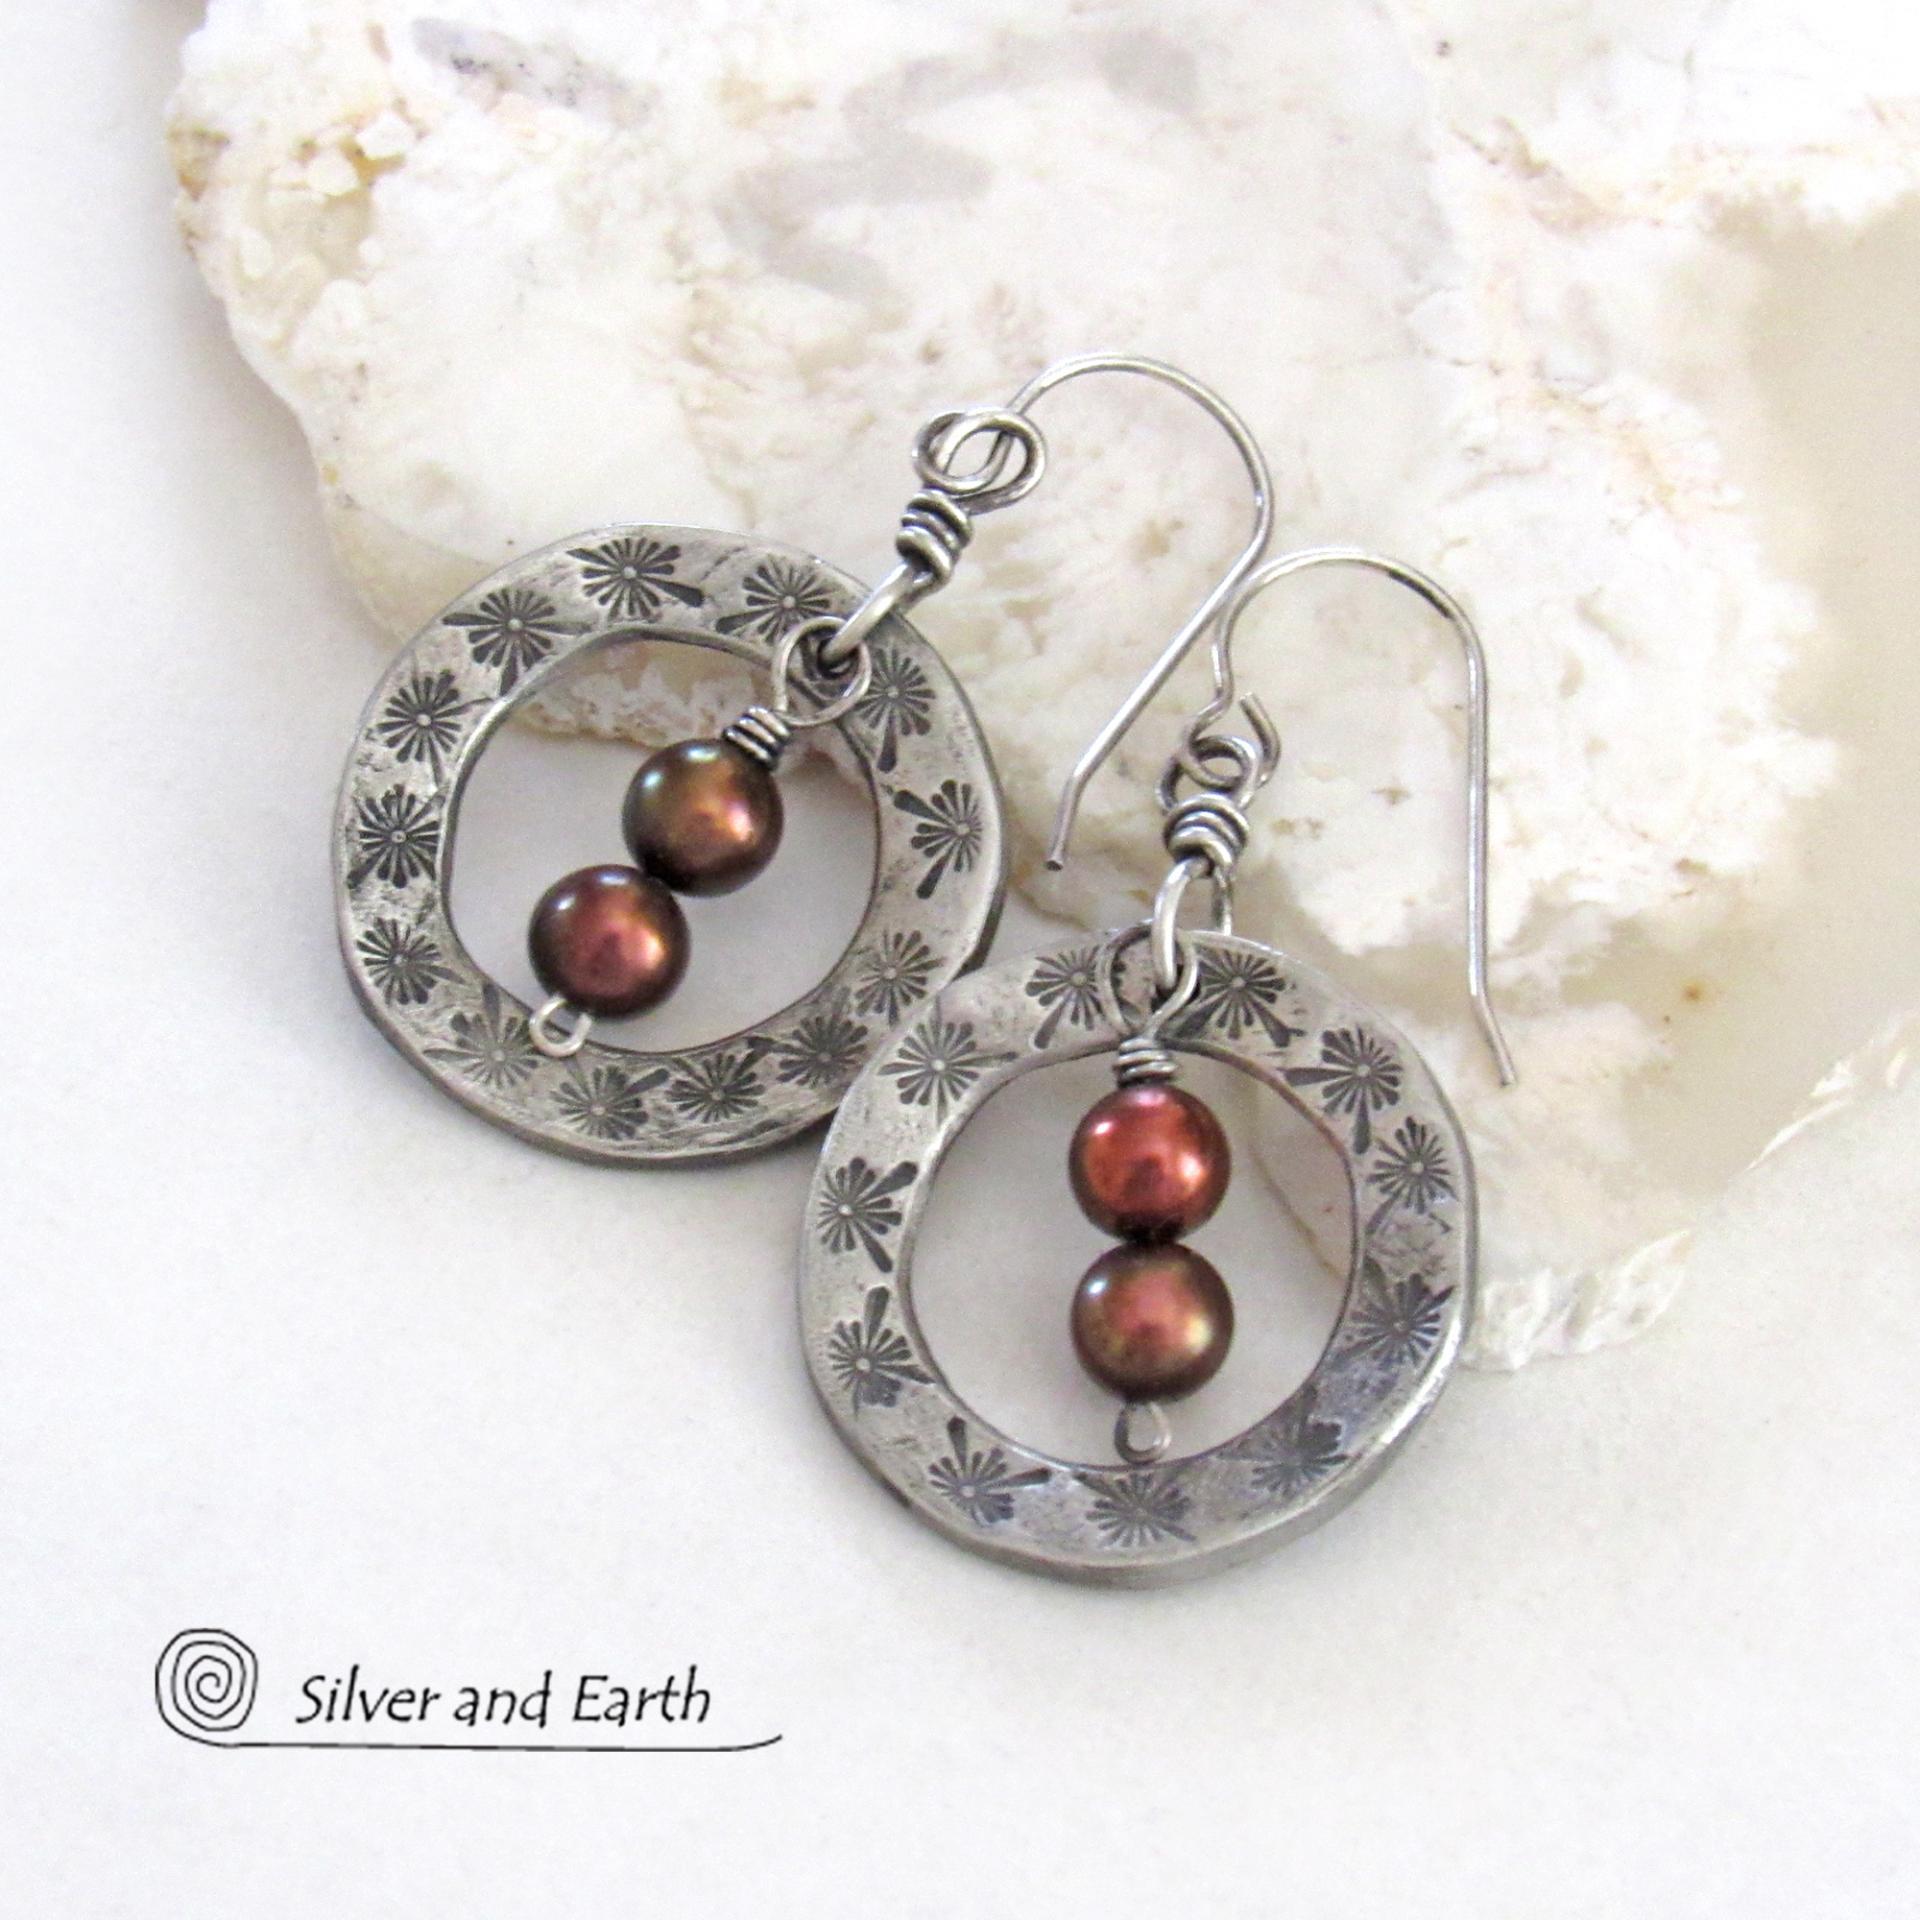 Hand Stamped Small Silver Pewter Circle Hoop Earrings with Bronze Freshwater Pearls - Artisan Handcrafted Earthy Modern Jewelry